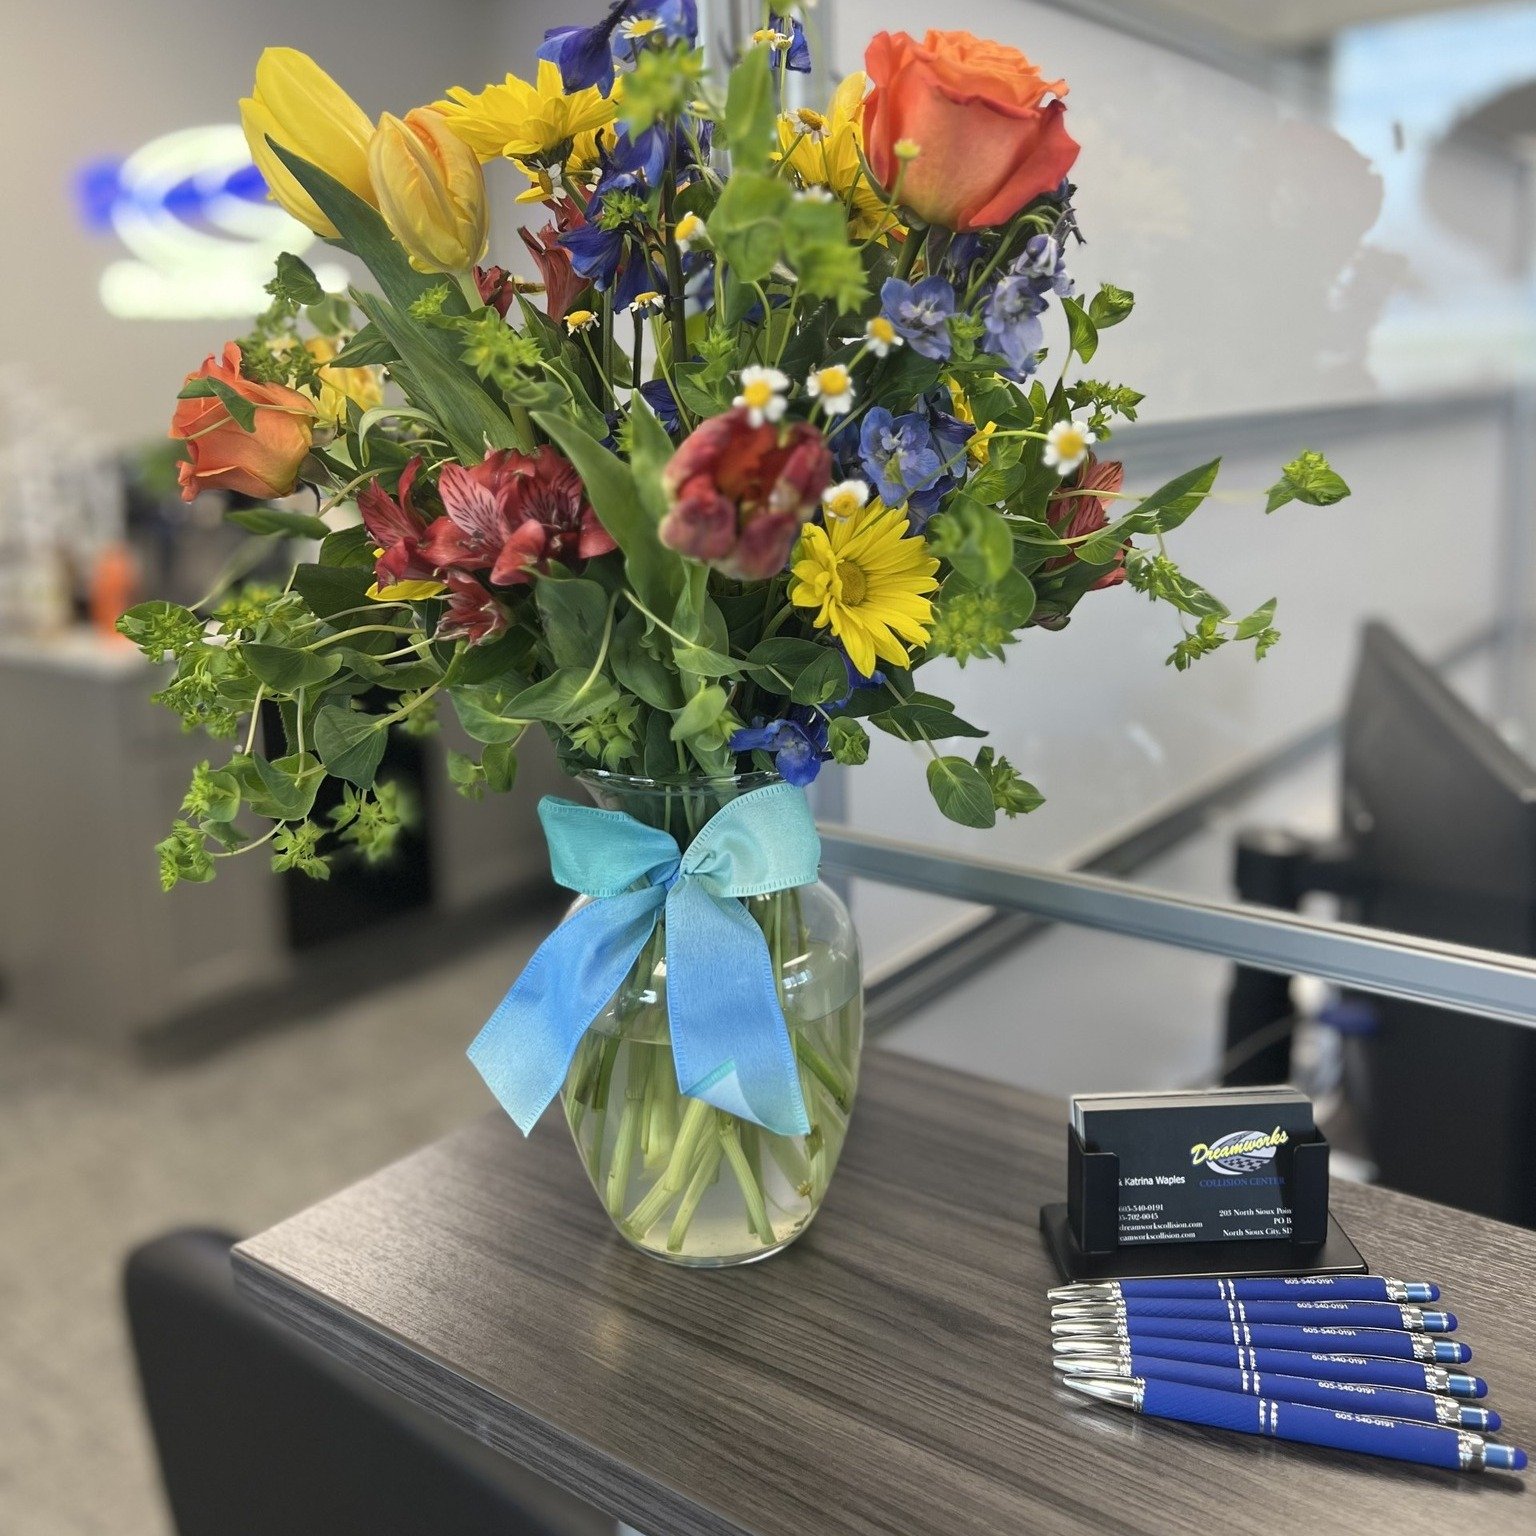 Spring is here!! Thank you to @flowercartcreations for this beautiful arrangement! Small businesses supporting one another is essential for the sustainability of a small community.